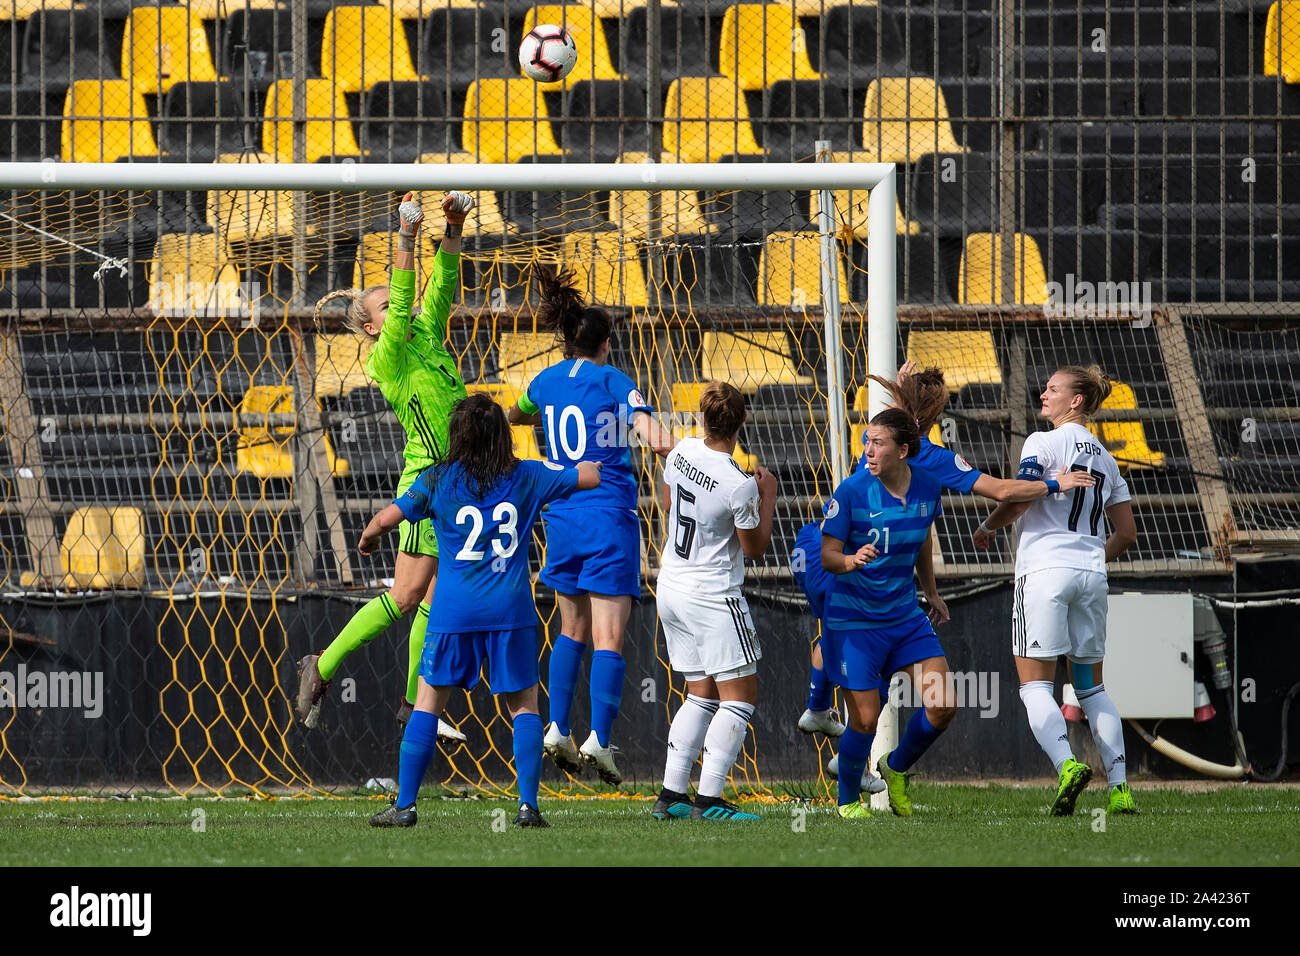 Thessaloniki, Greece, October 08, 2019:Frohms (l) from Germany jumping for the ball during the UEFA Women's European Championship 2021 qualifier match Stock Photo